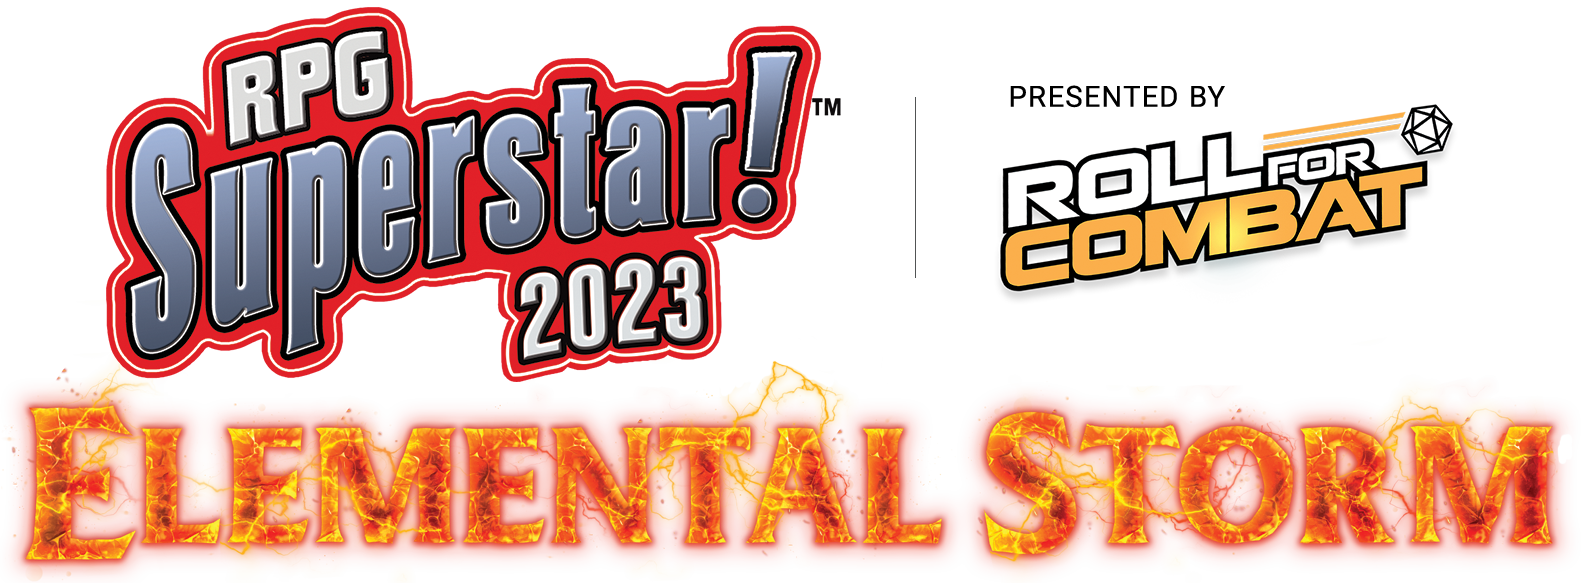 RPG Superstar! 2023 Elemental Storm Presented by Roll For Combat